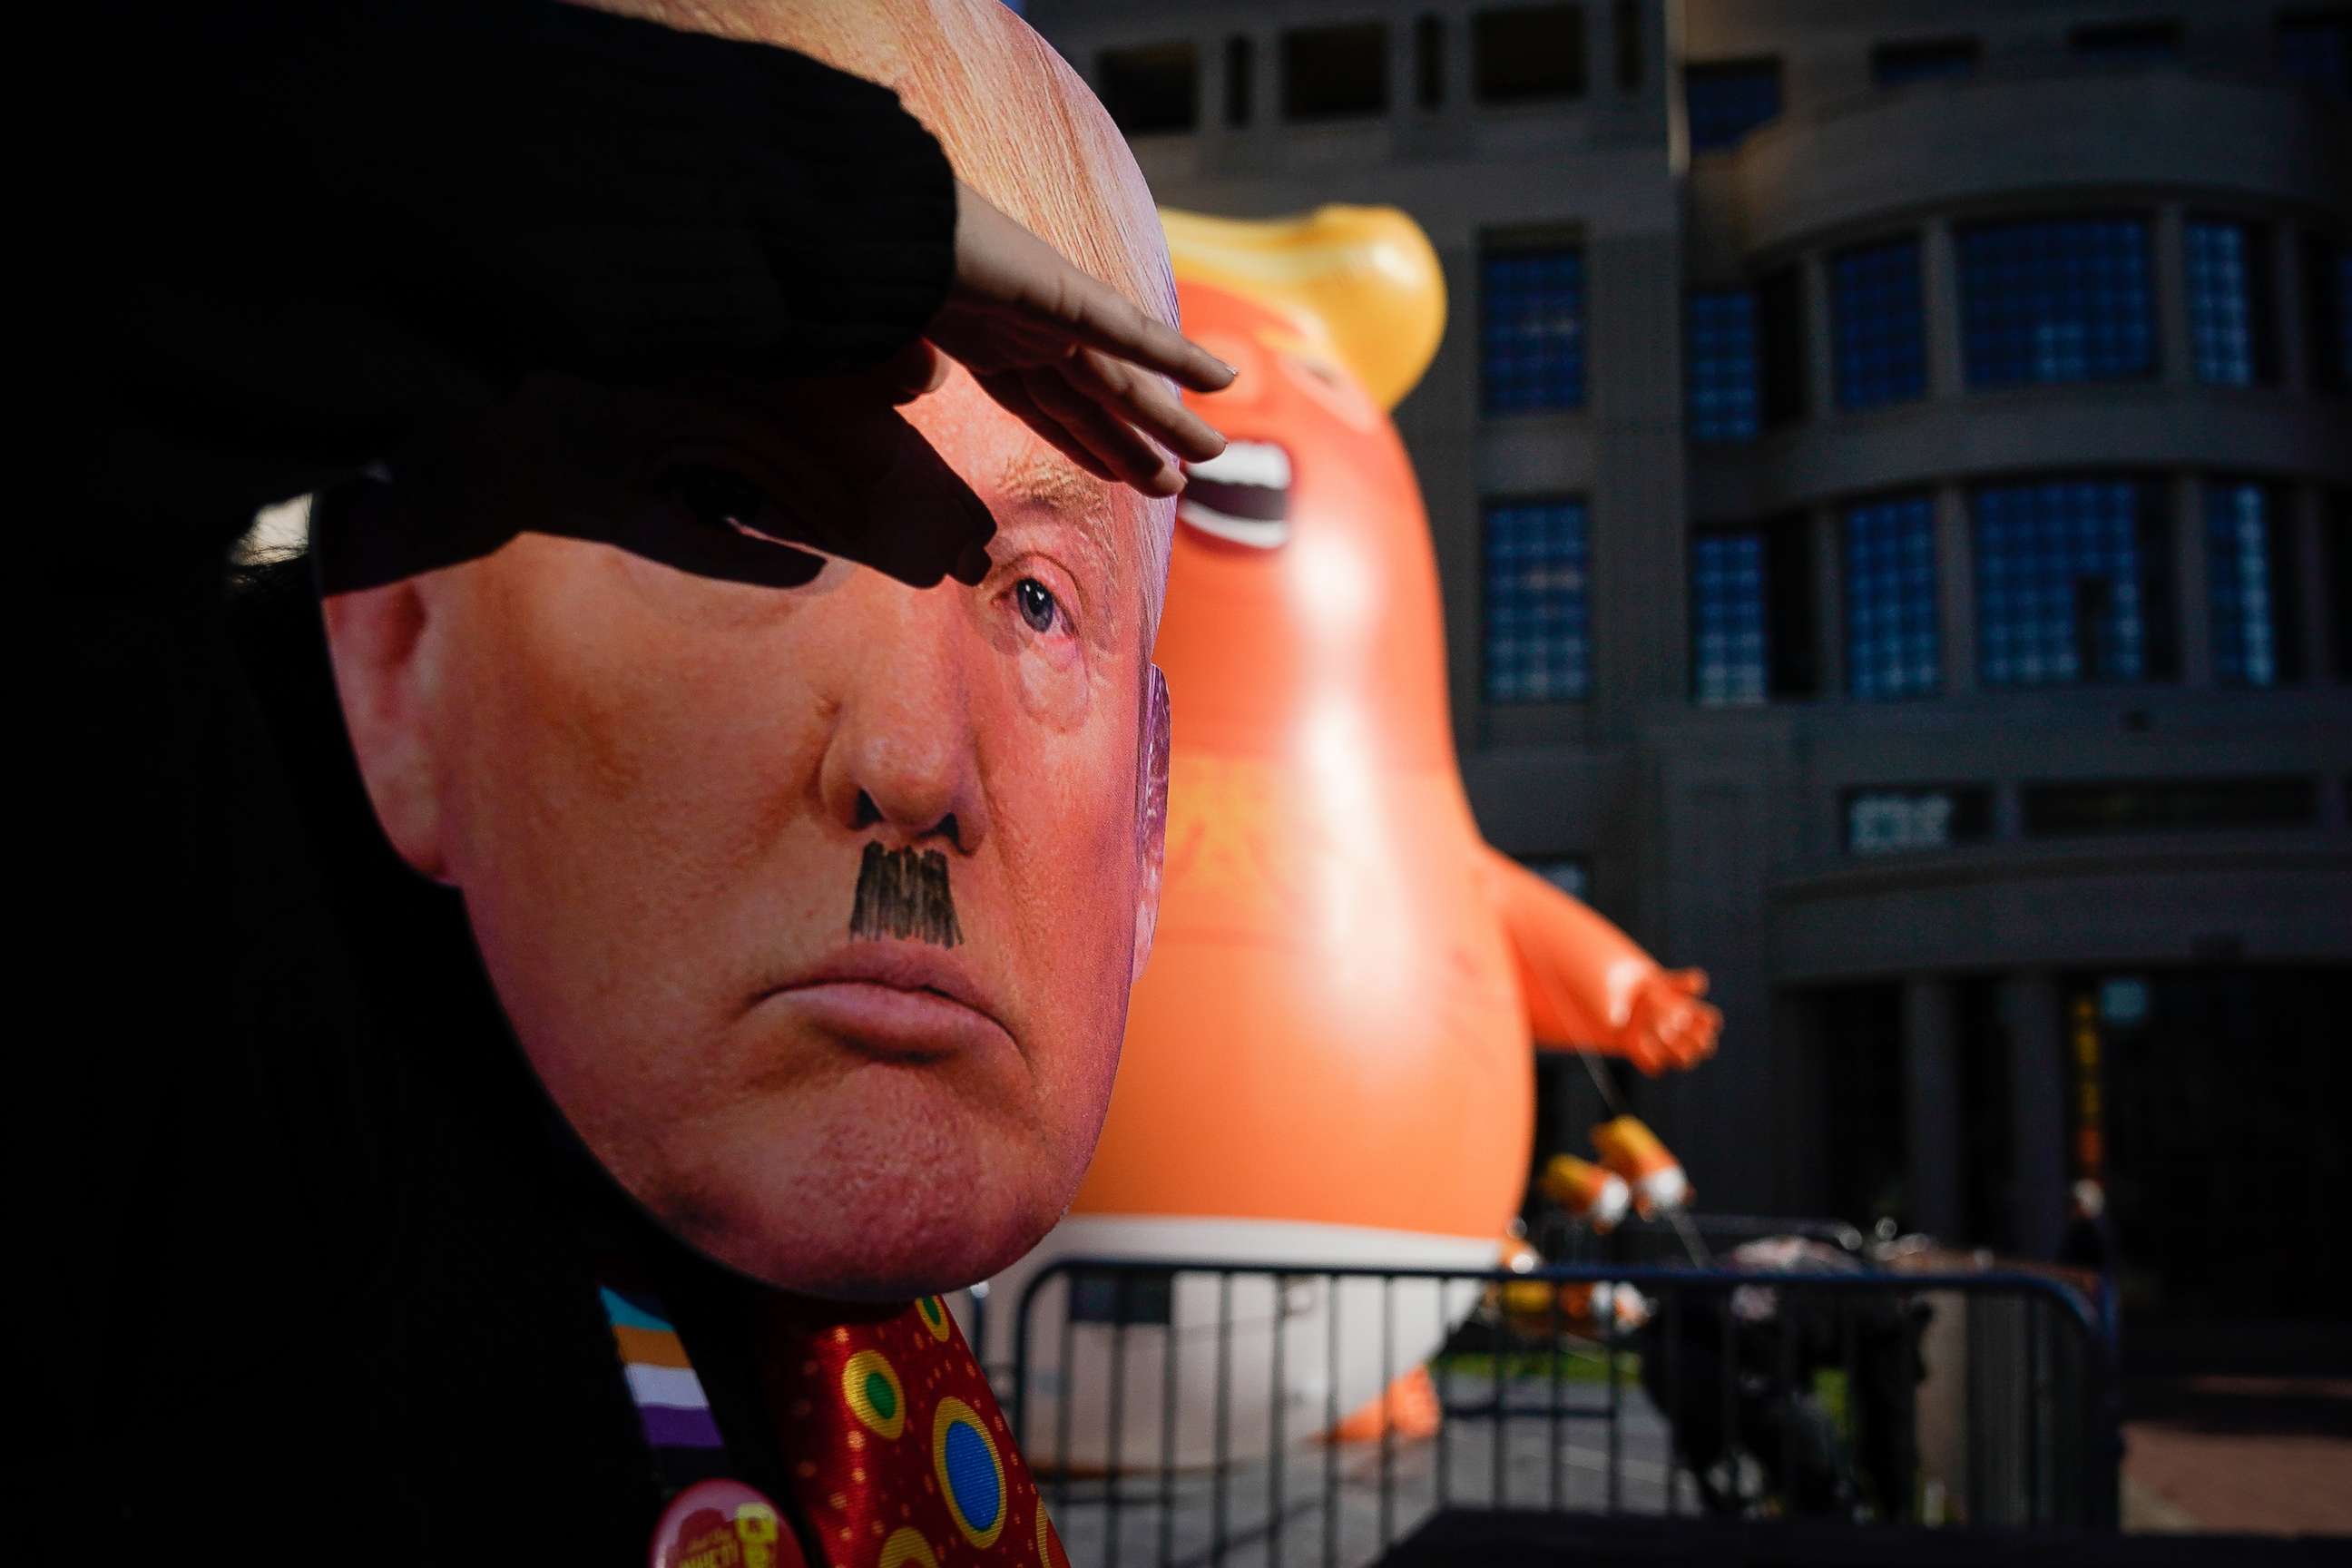 PHOTO: A protester wearing a mask dances near a Baby Trump balloon last week in front of the courthouse on November 4, 2019 in Lexington, Kentucky. (Photo by Bryan Woolston/Getty Images)